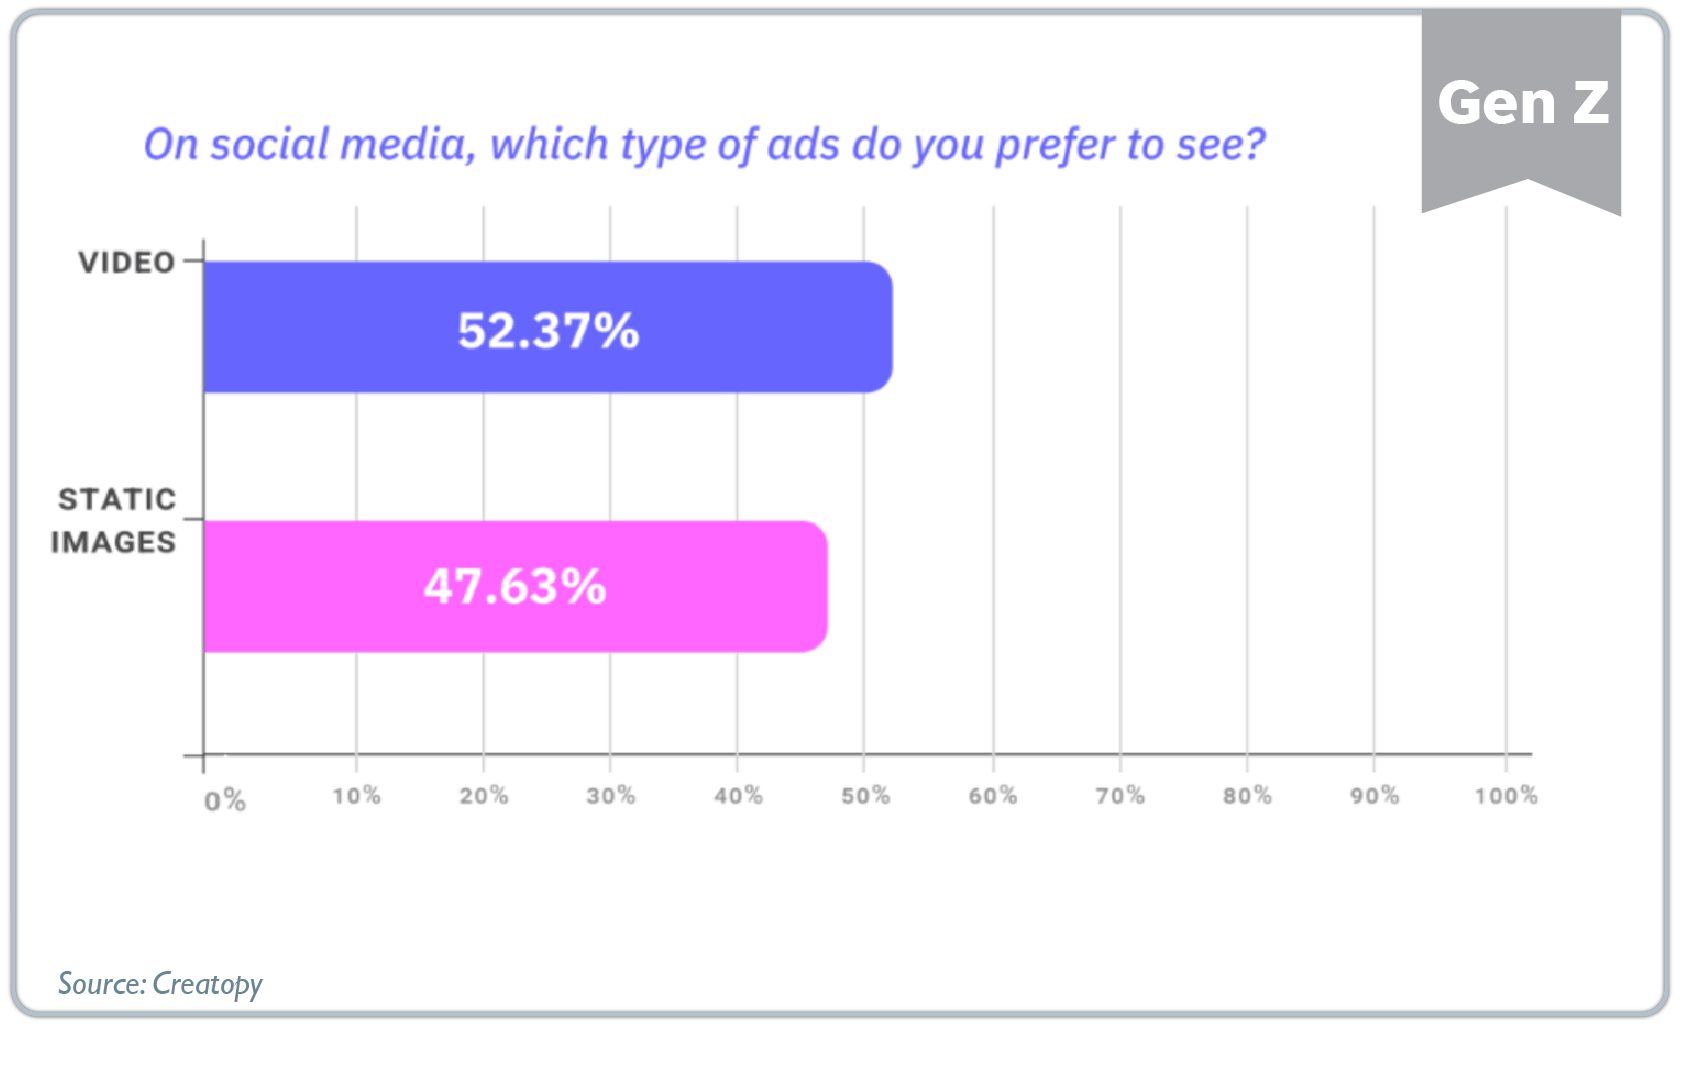 how to market to generation z - generation z social media stats - videos and static images are equally preferred